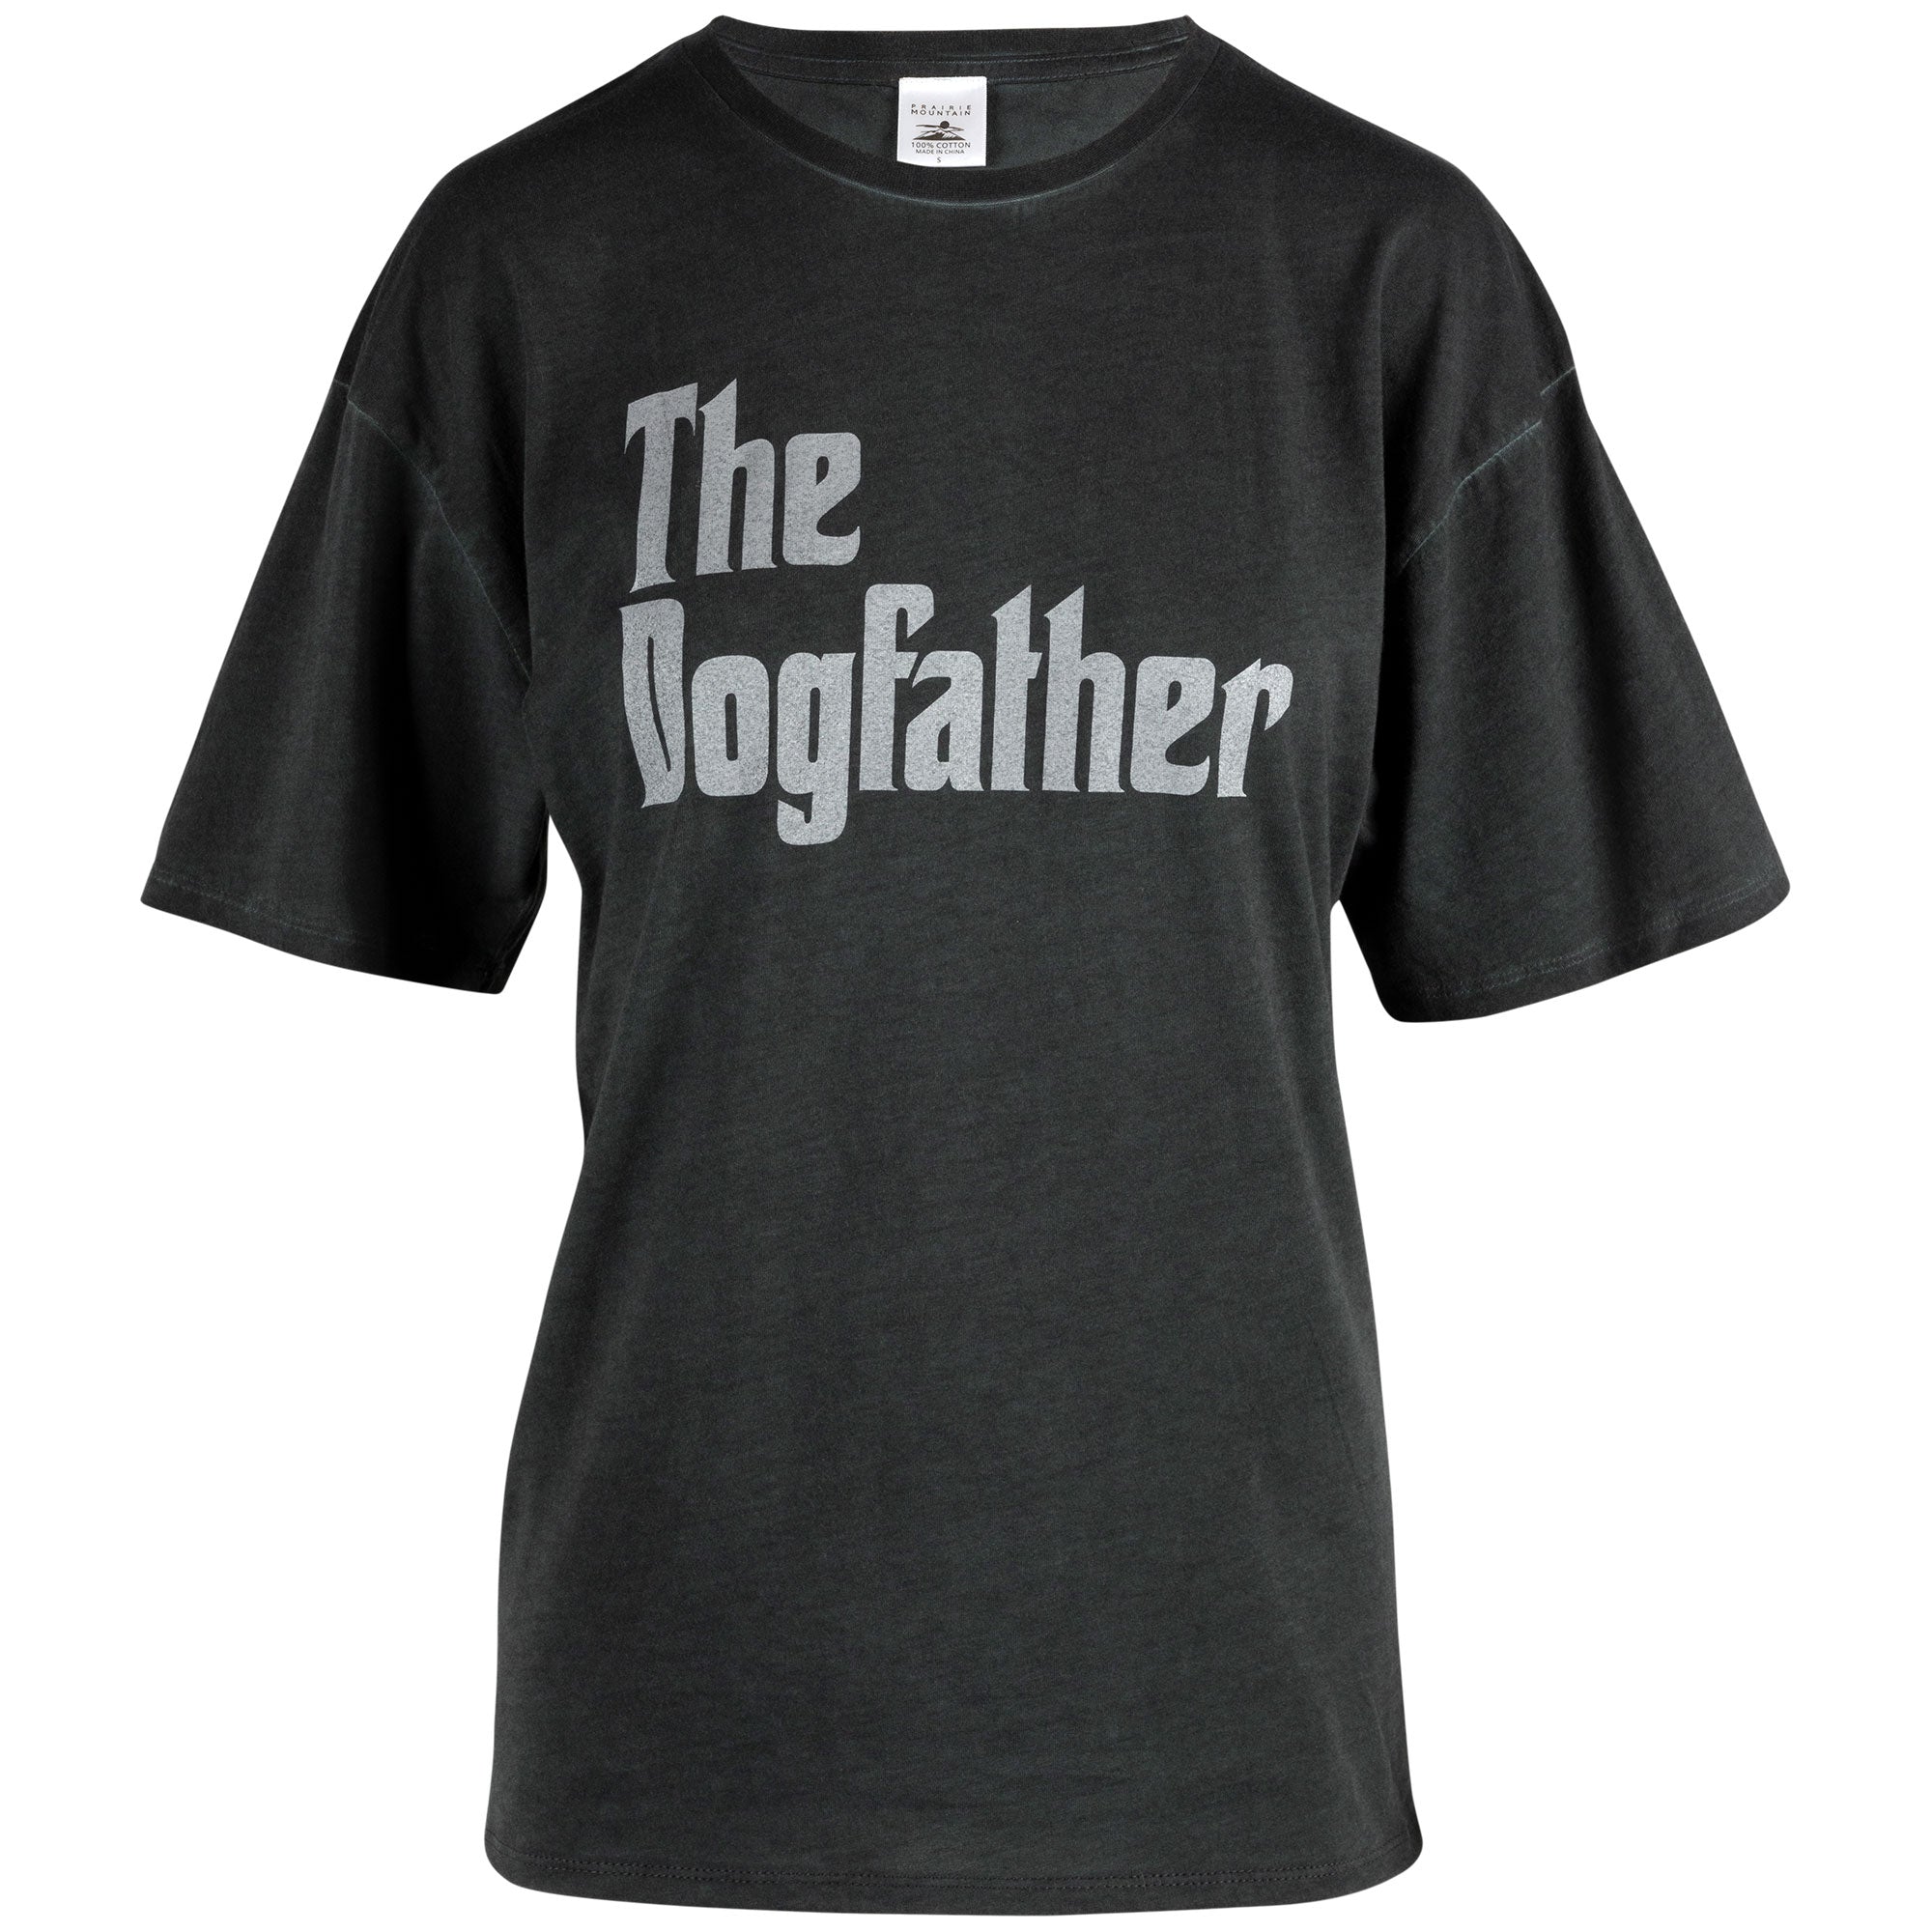 The Dogfather Mineral Wash T-Shirt - L